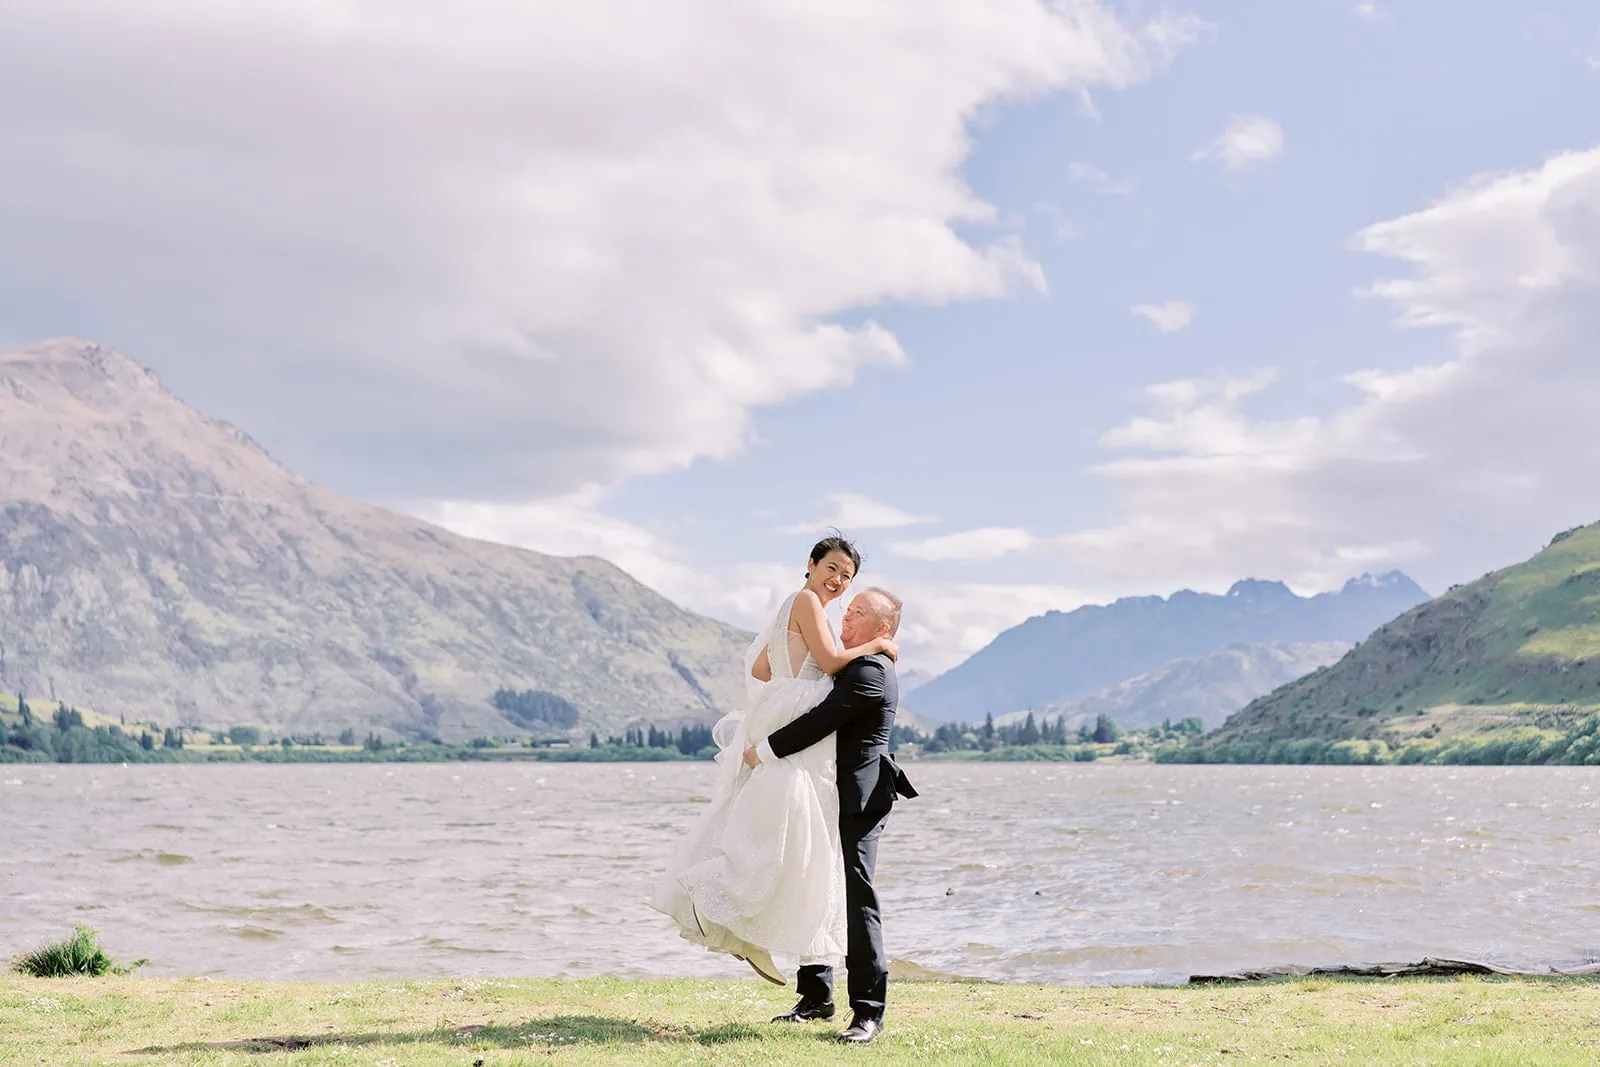 Queenstown Elopement Heli Wedding Photographer クイーンズタウン結婚式 | Meng & Joel, a bride and groom, exchange vows in front of a picturesque lake at Stoneridge Estate during their New Zealand wedding.